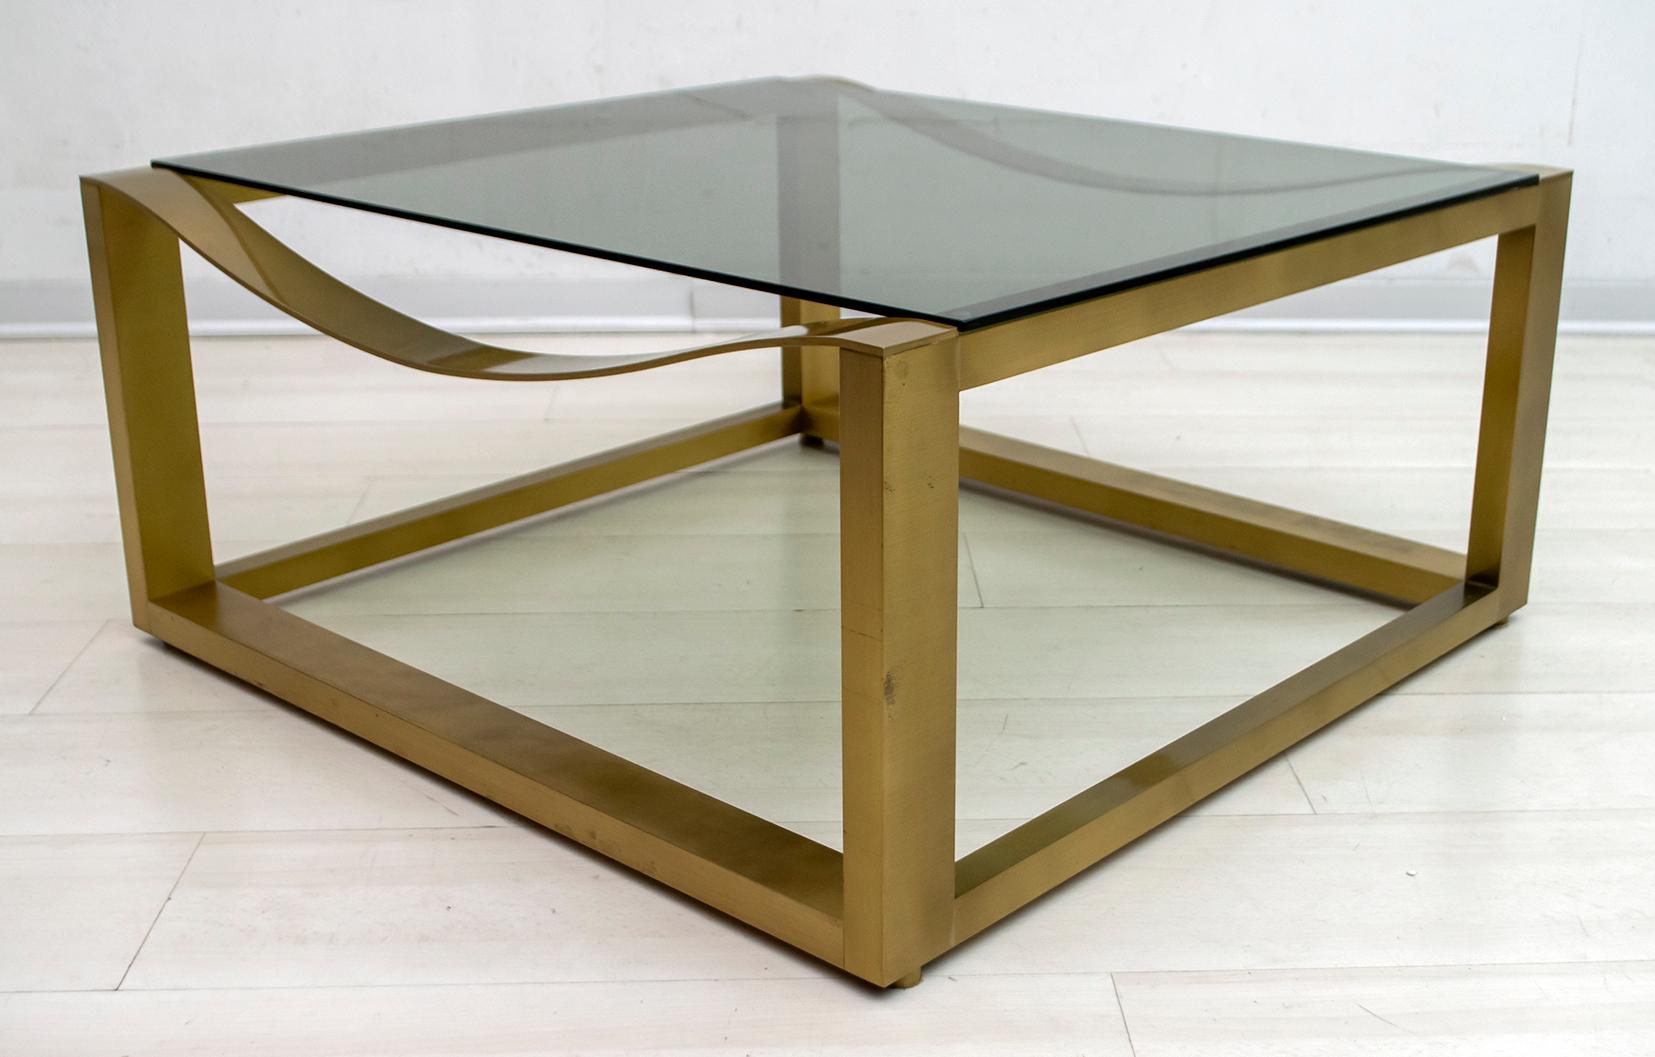 Smoked Glass Luciano Frigerio Mid-Century Modern Italian Design Brass Coffee Table, 1970s For Sale